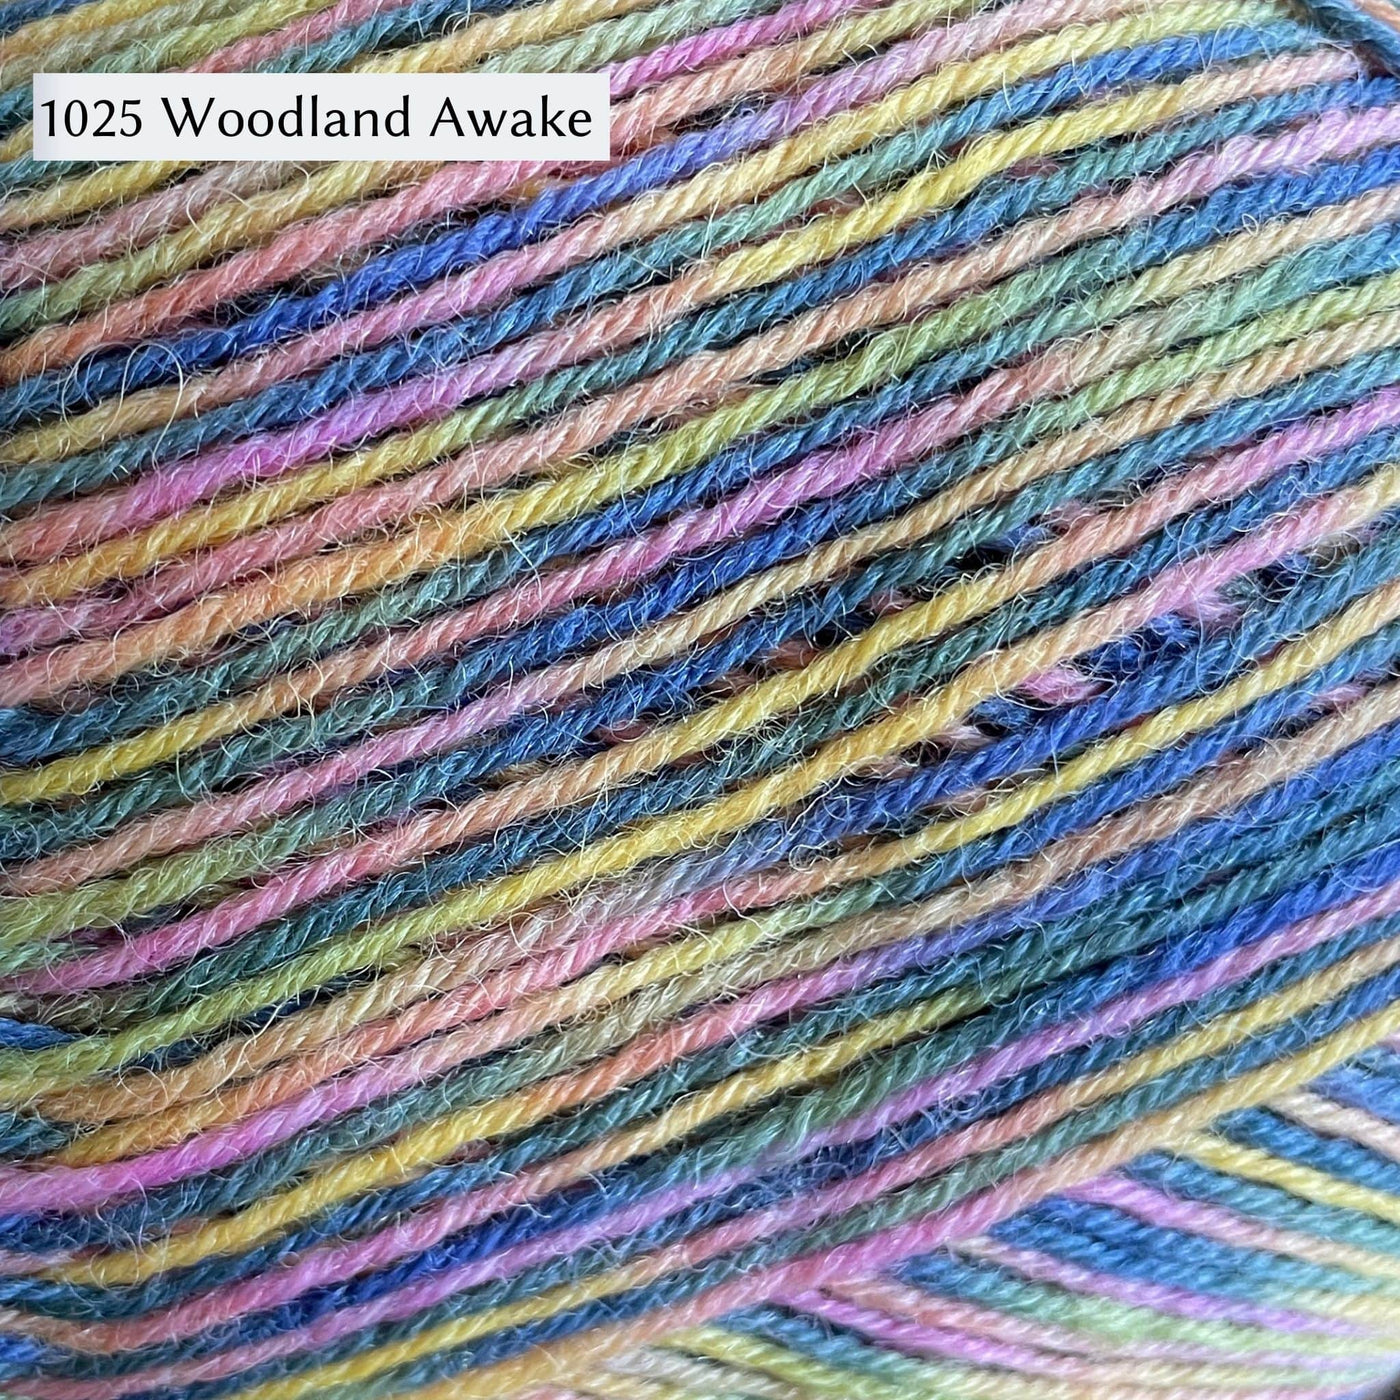 West Yorkshire Spinners Signature 4ply yarn, fingering weight, in color 1025 Woodland Awake, a pastel multicolor with light blues, greens, yellows, and pinks in blended stripes